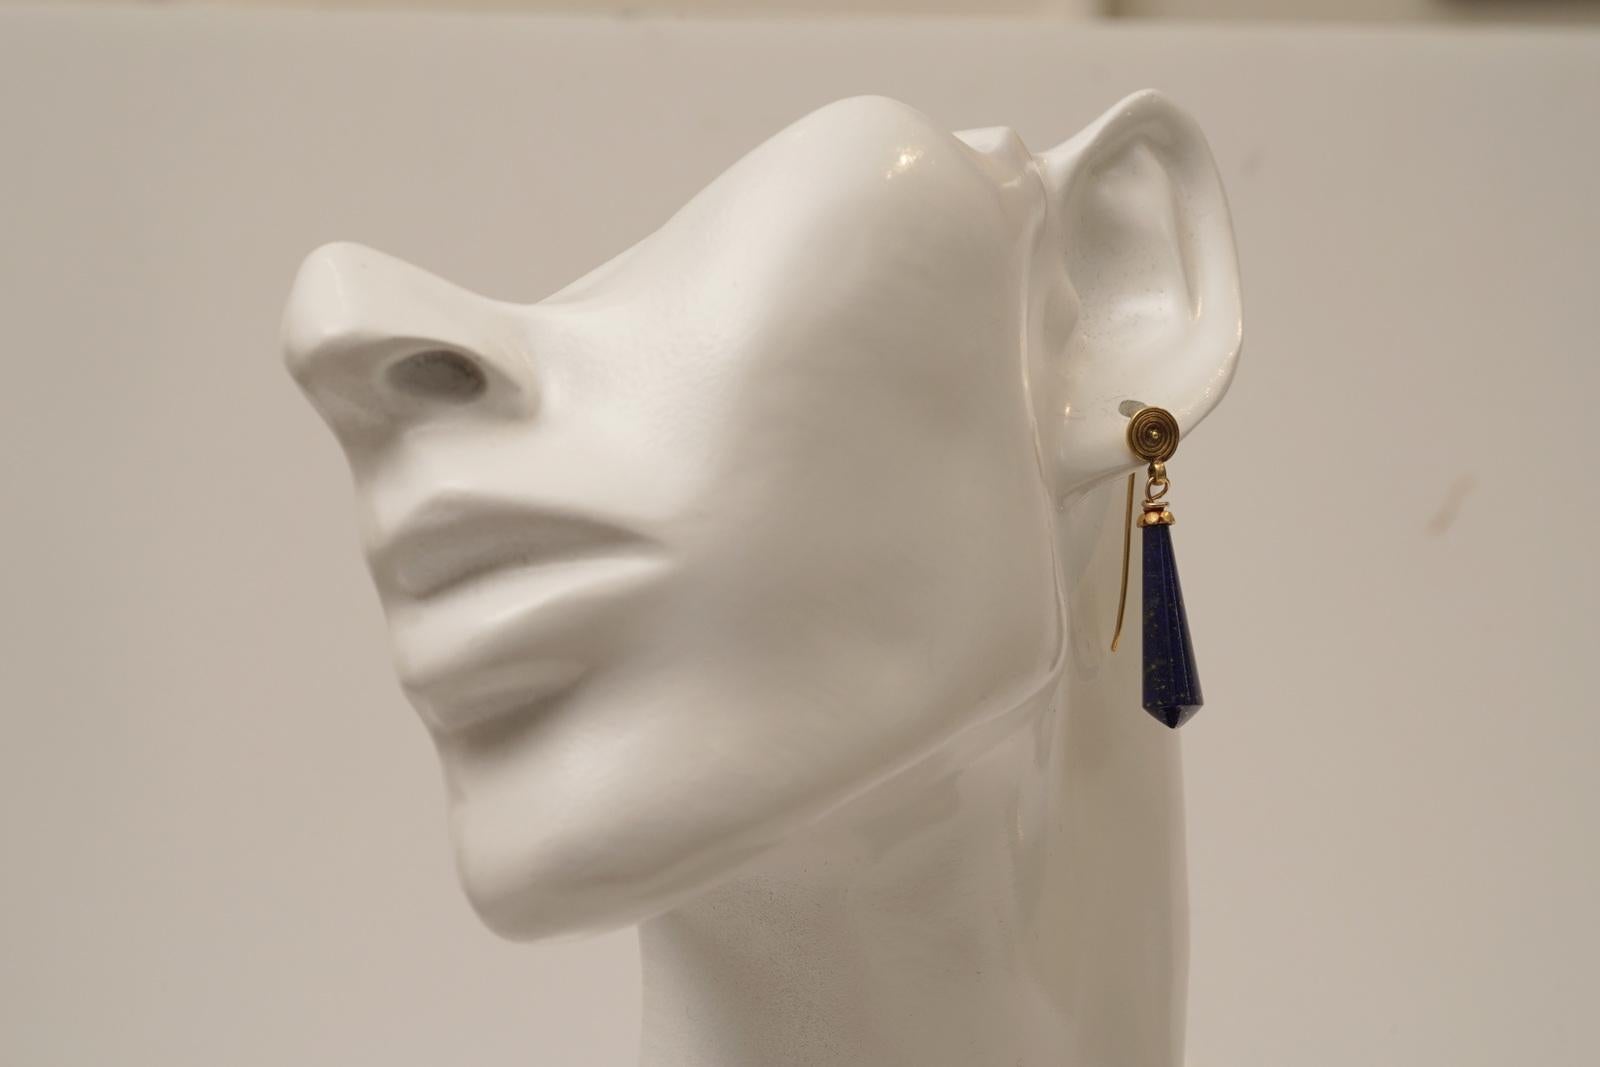 22 Karat Gold and Lapis Lazuli Drop Earrings In Excellent Condition For Sale In Nantucket, MA